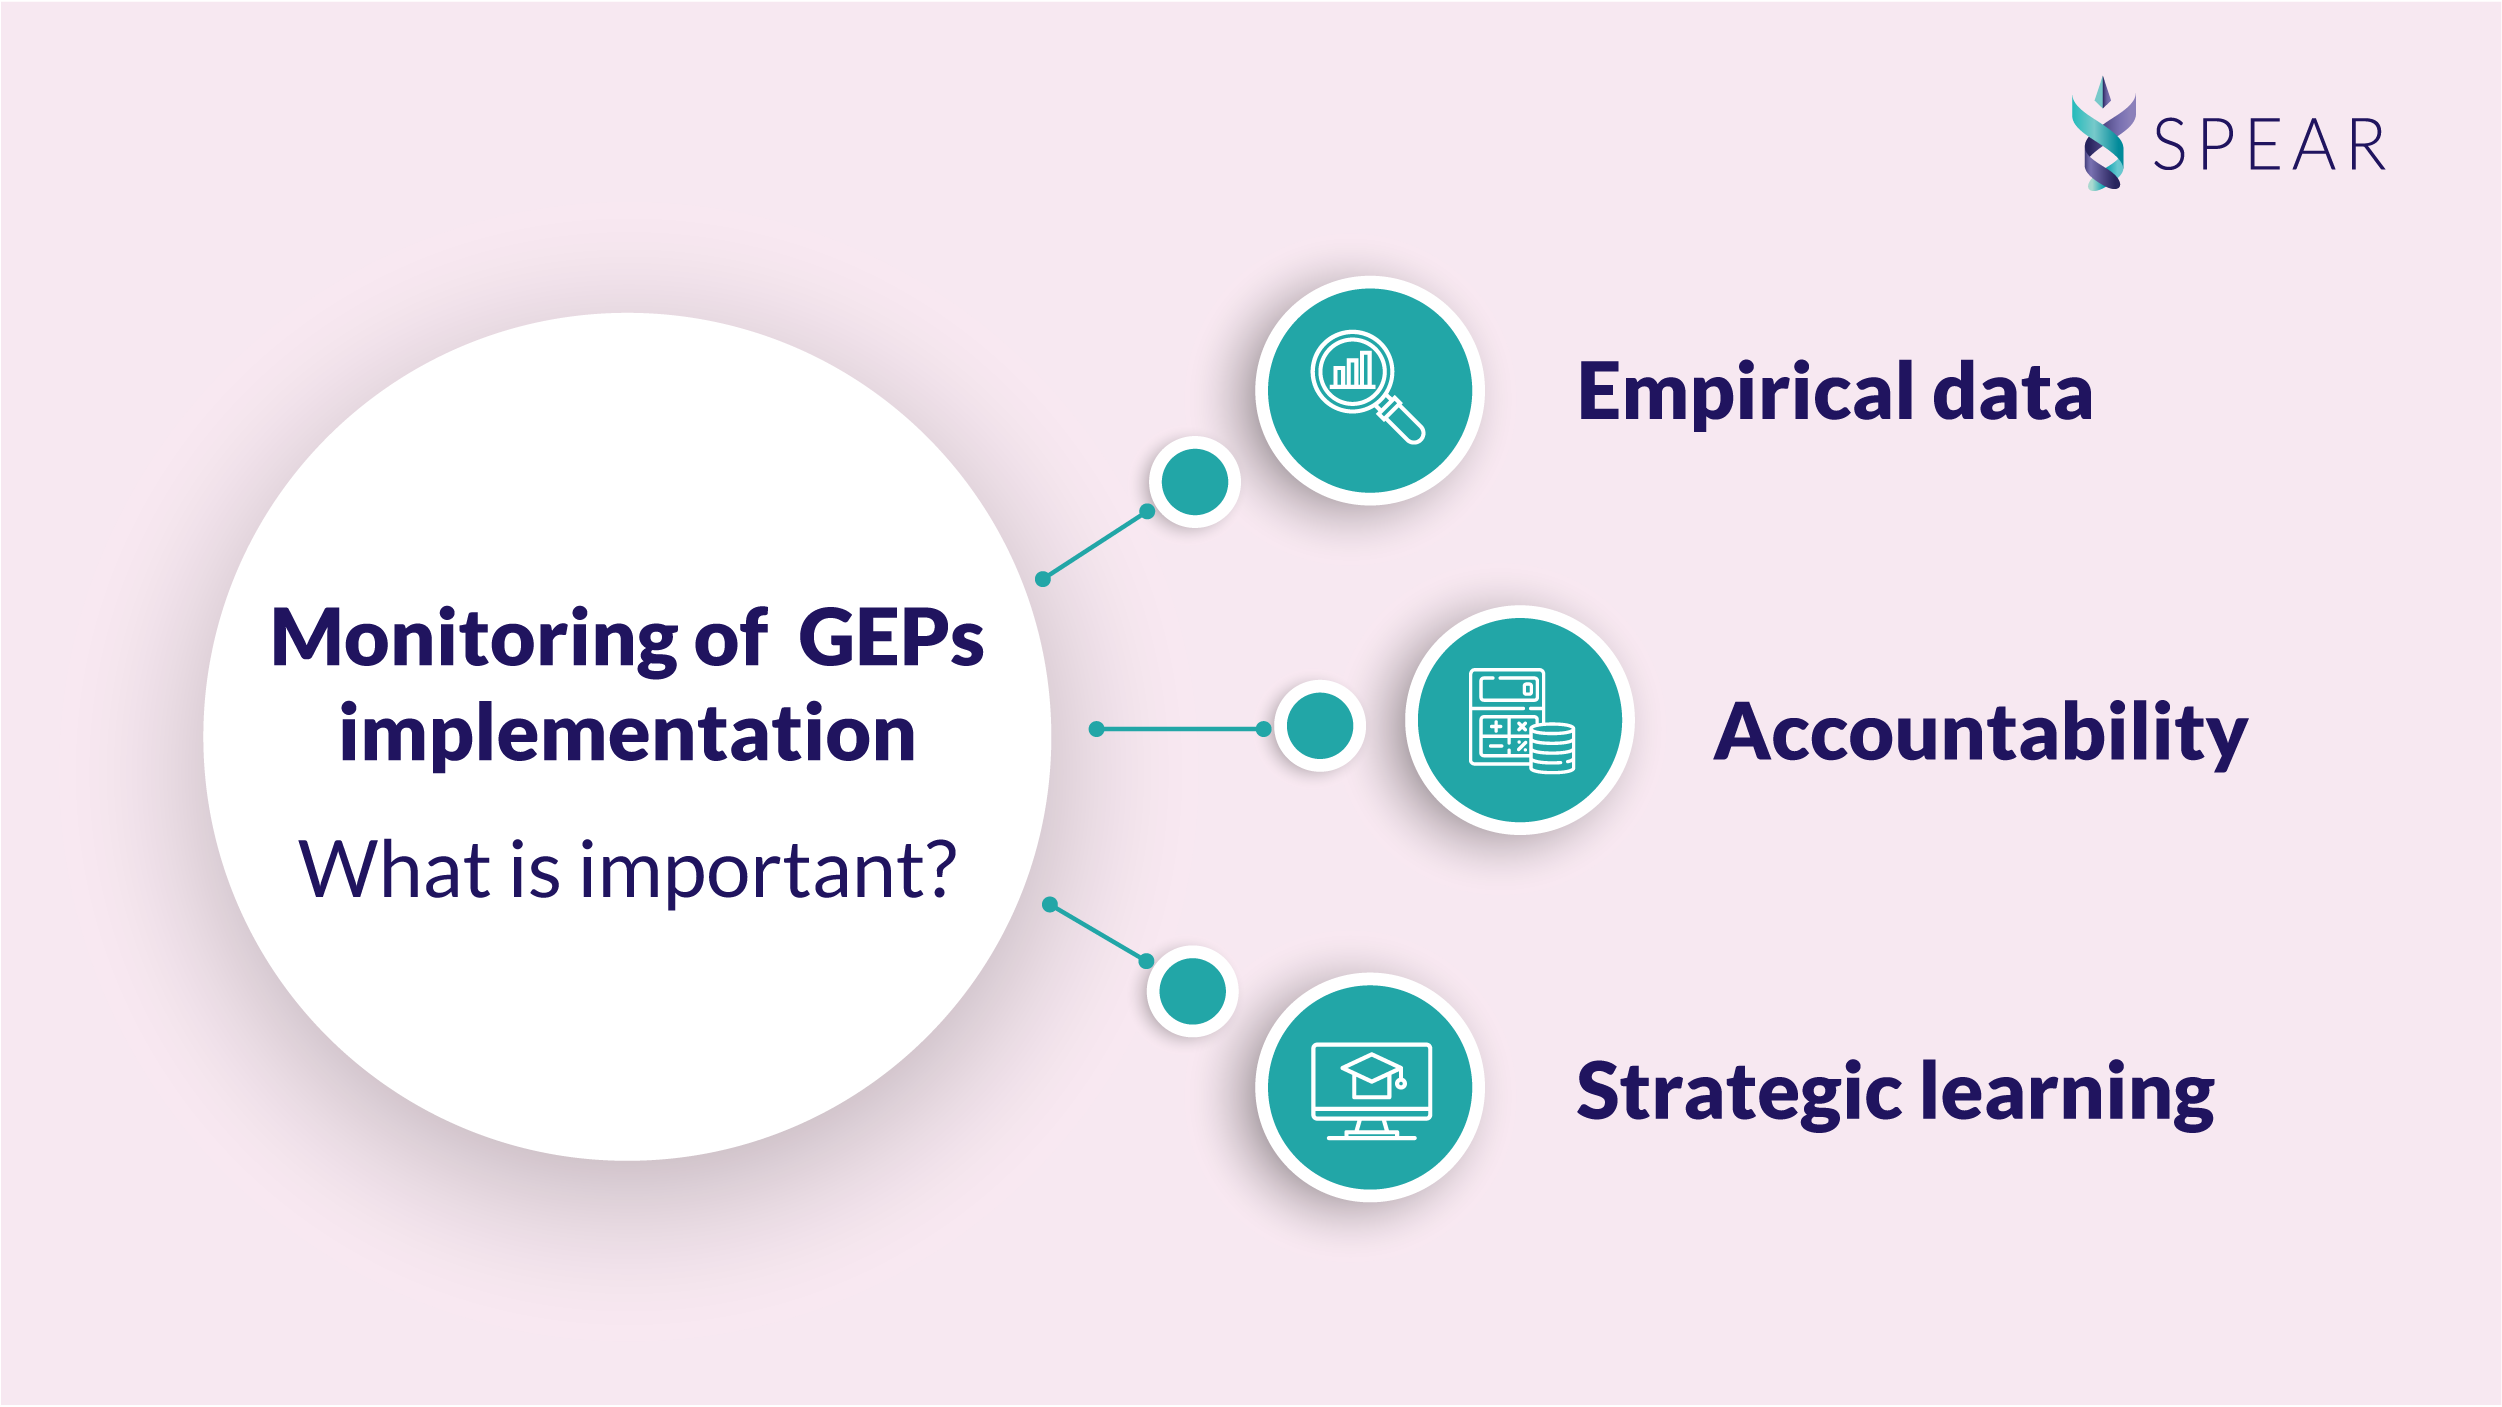 Monitoring of GEP implementation - why is it important?